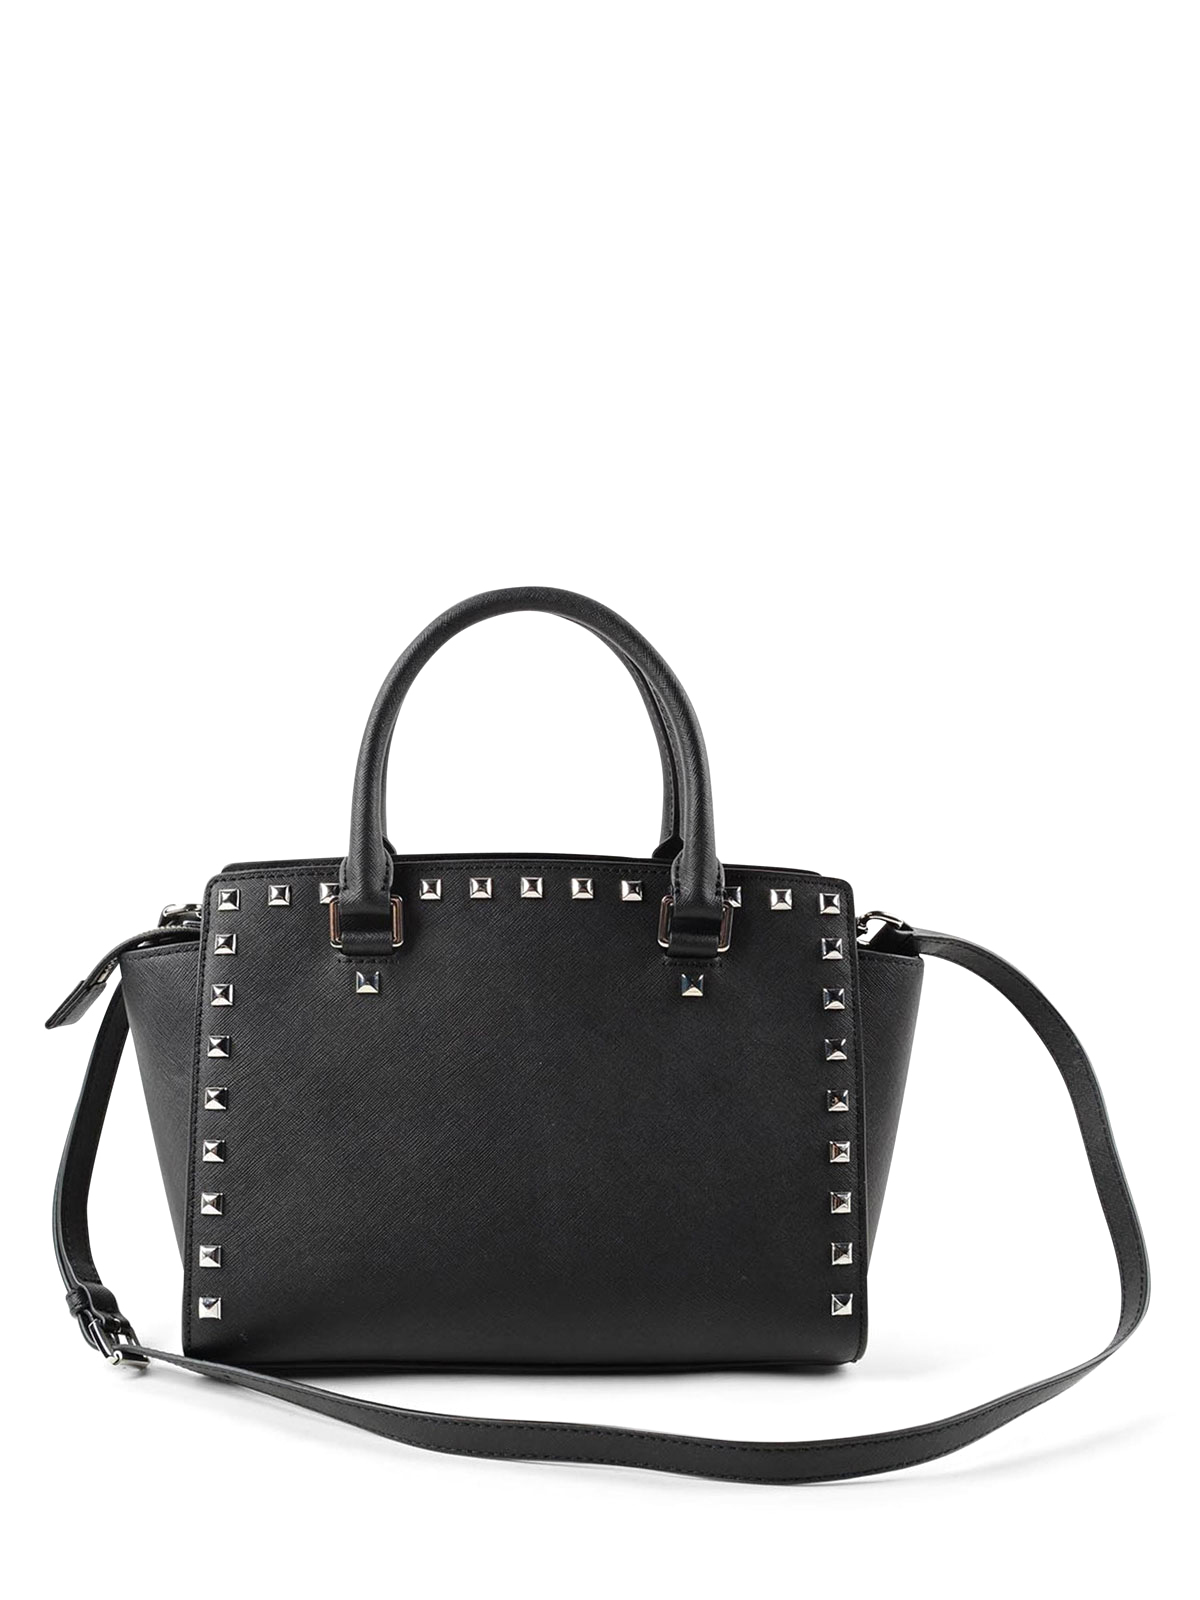 Totes bags Michael Kors - Selma studded tote - 30T3SSMMS2L001